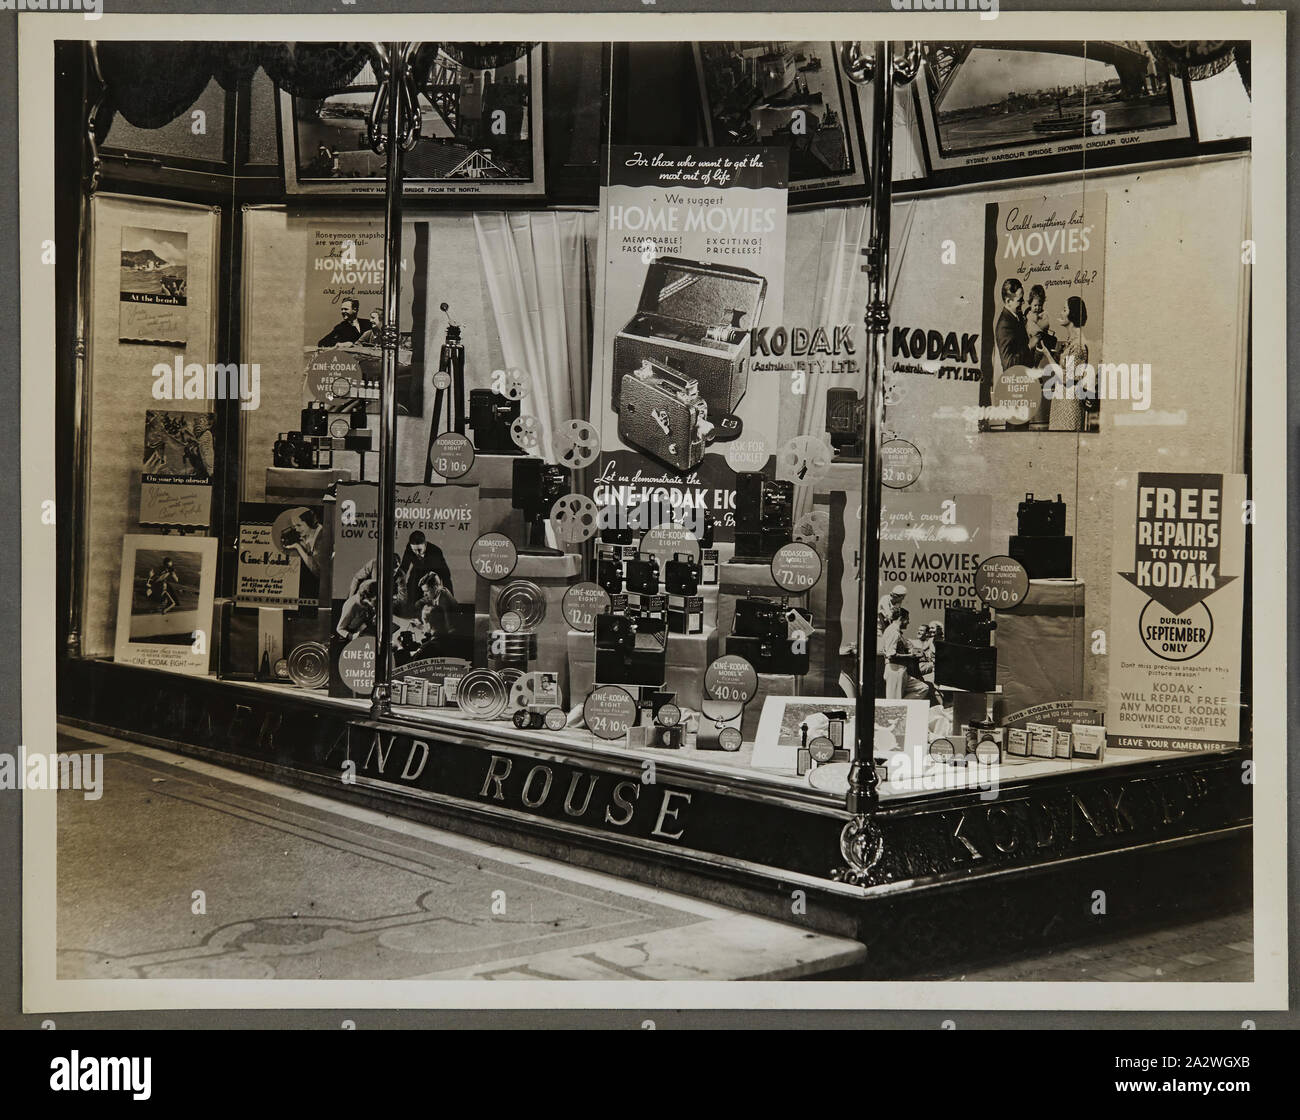 Photograph - Kodak, Shopfront Display, 'We Suggest Home Movies', circa 1934-1936, Shopfront display 'We Suggest Home Movies' showing movie cameras, photographs, photographic accessories and equipment. One of fifty-six photographs in an album depicting Kodak Australasia Pty Ltd shop front window displays from the mid-1930s. Windows generally featured product promotions for film or cameras, as well as photographic exhibitions to attract crowds to the store. Exhibitions featured Stock Photo